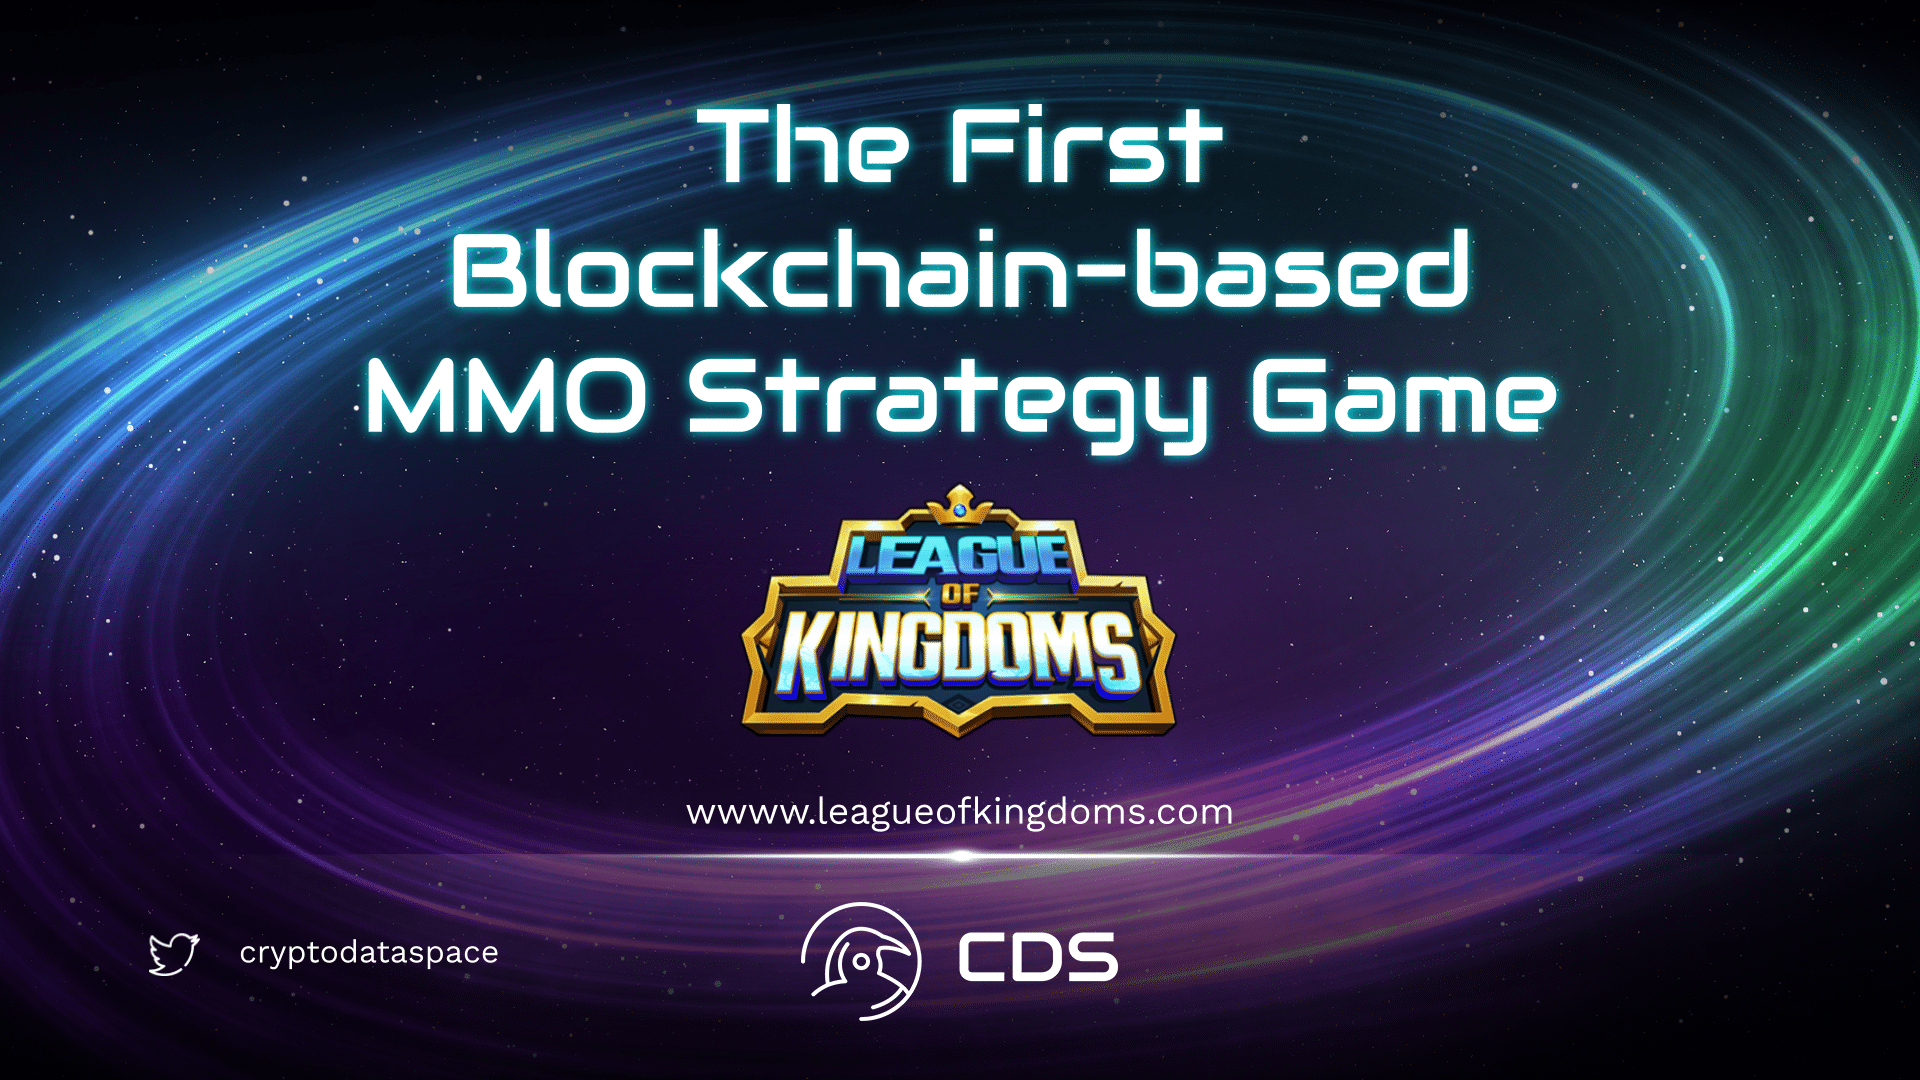 The First Blockchain-based MMO Strategy Game